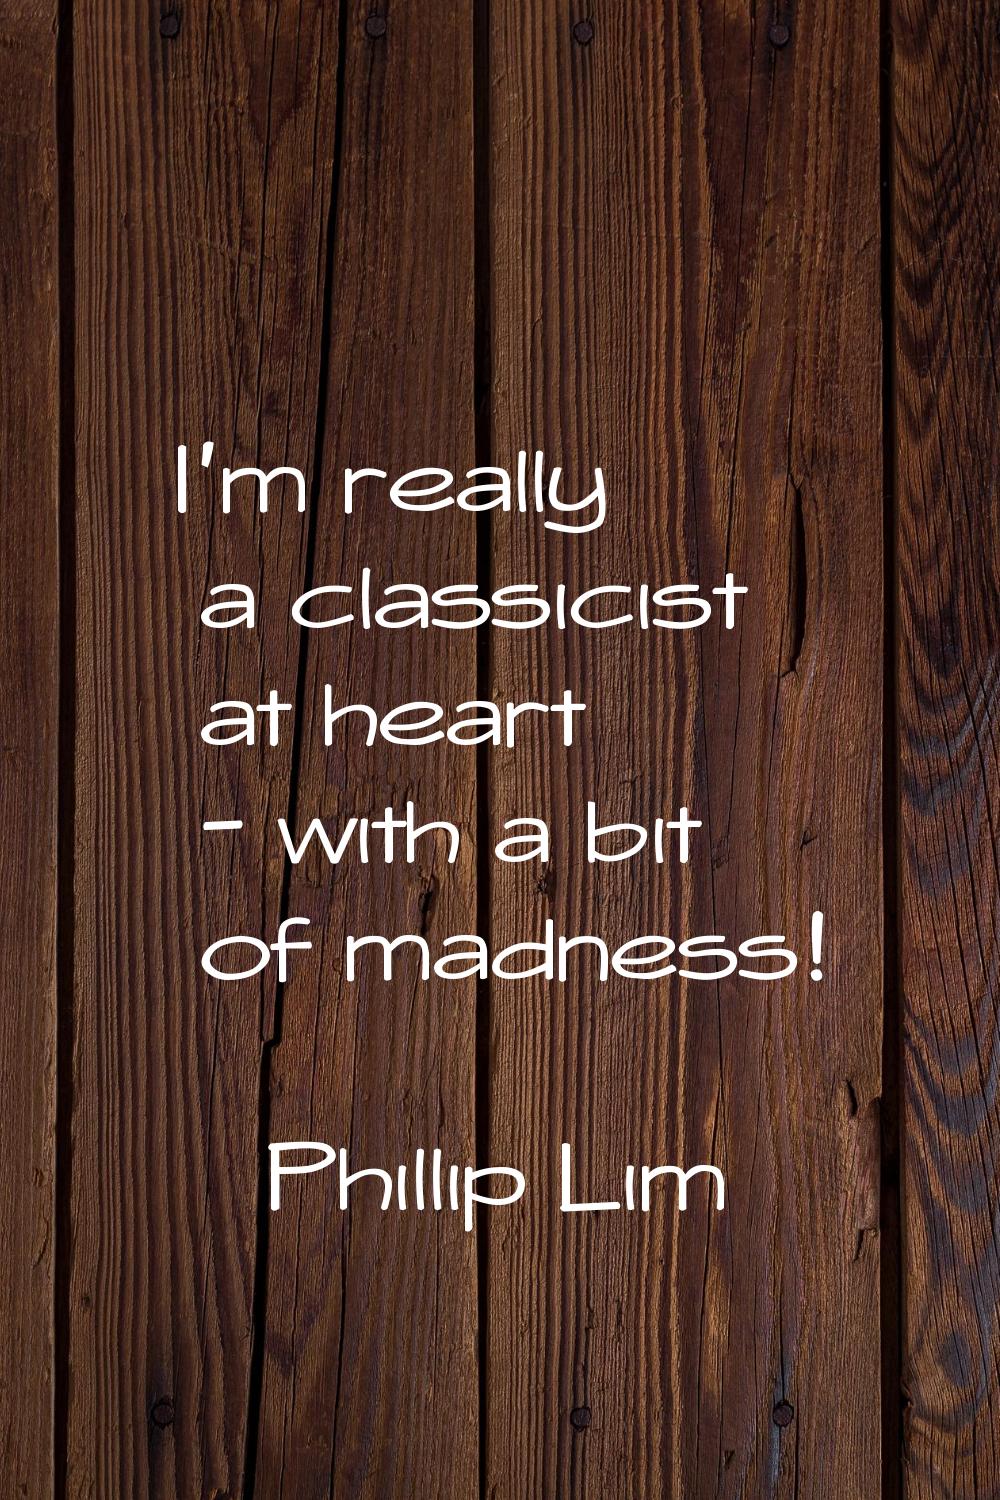 I'm really a classicist at heart - with a bit of madness!